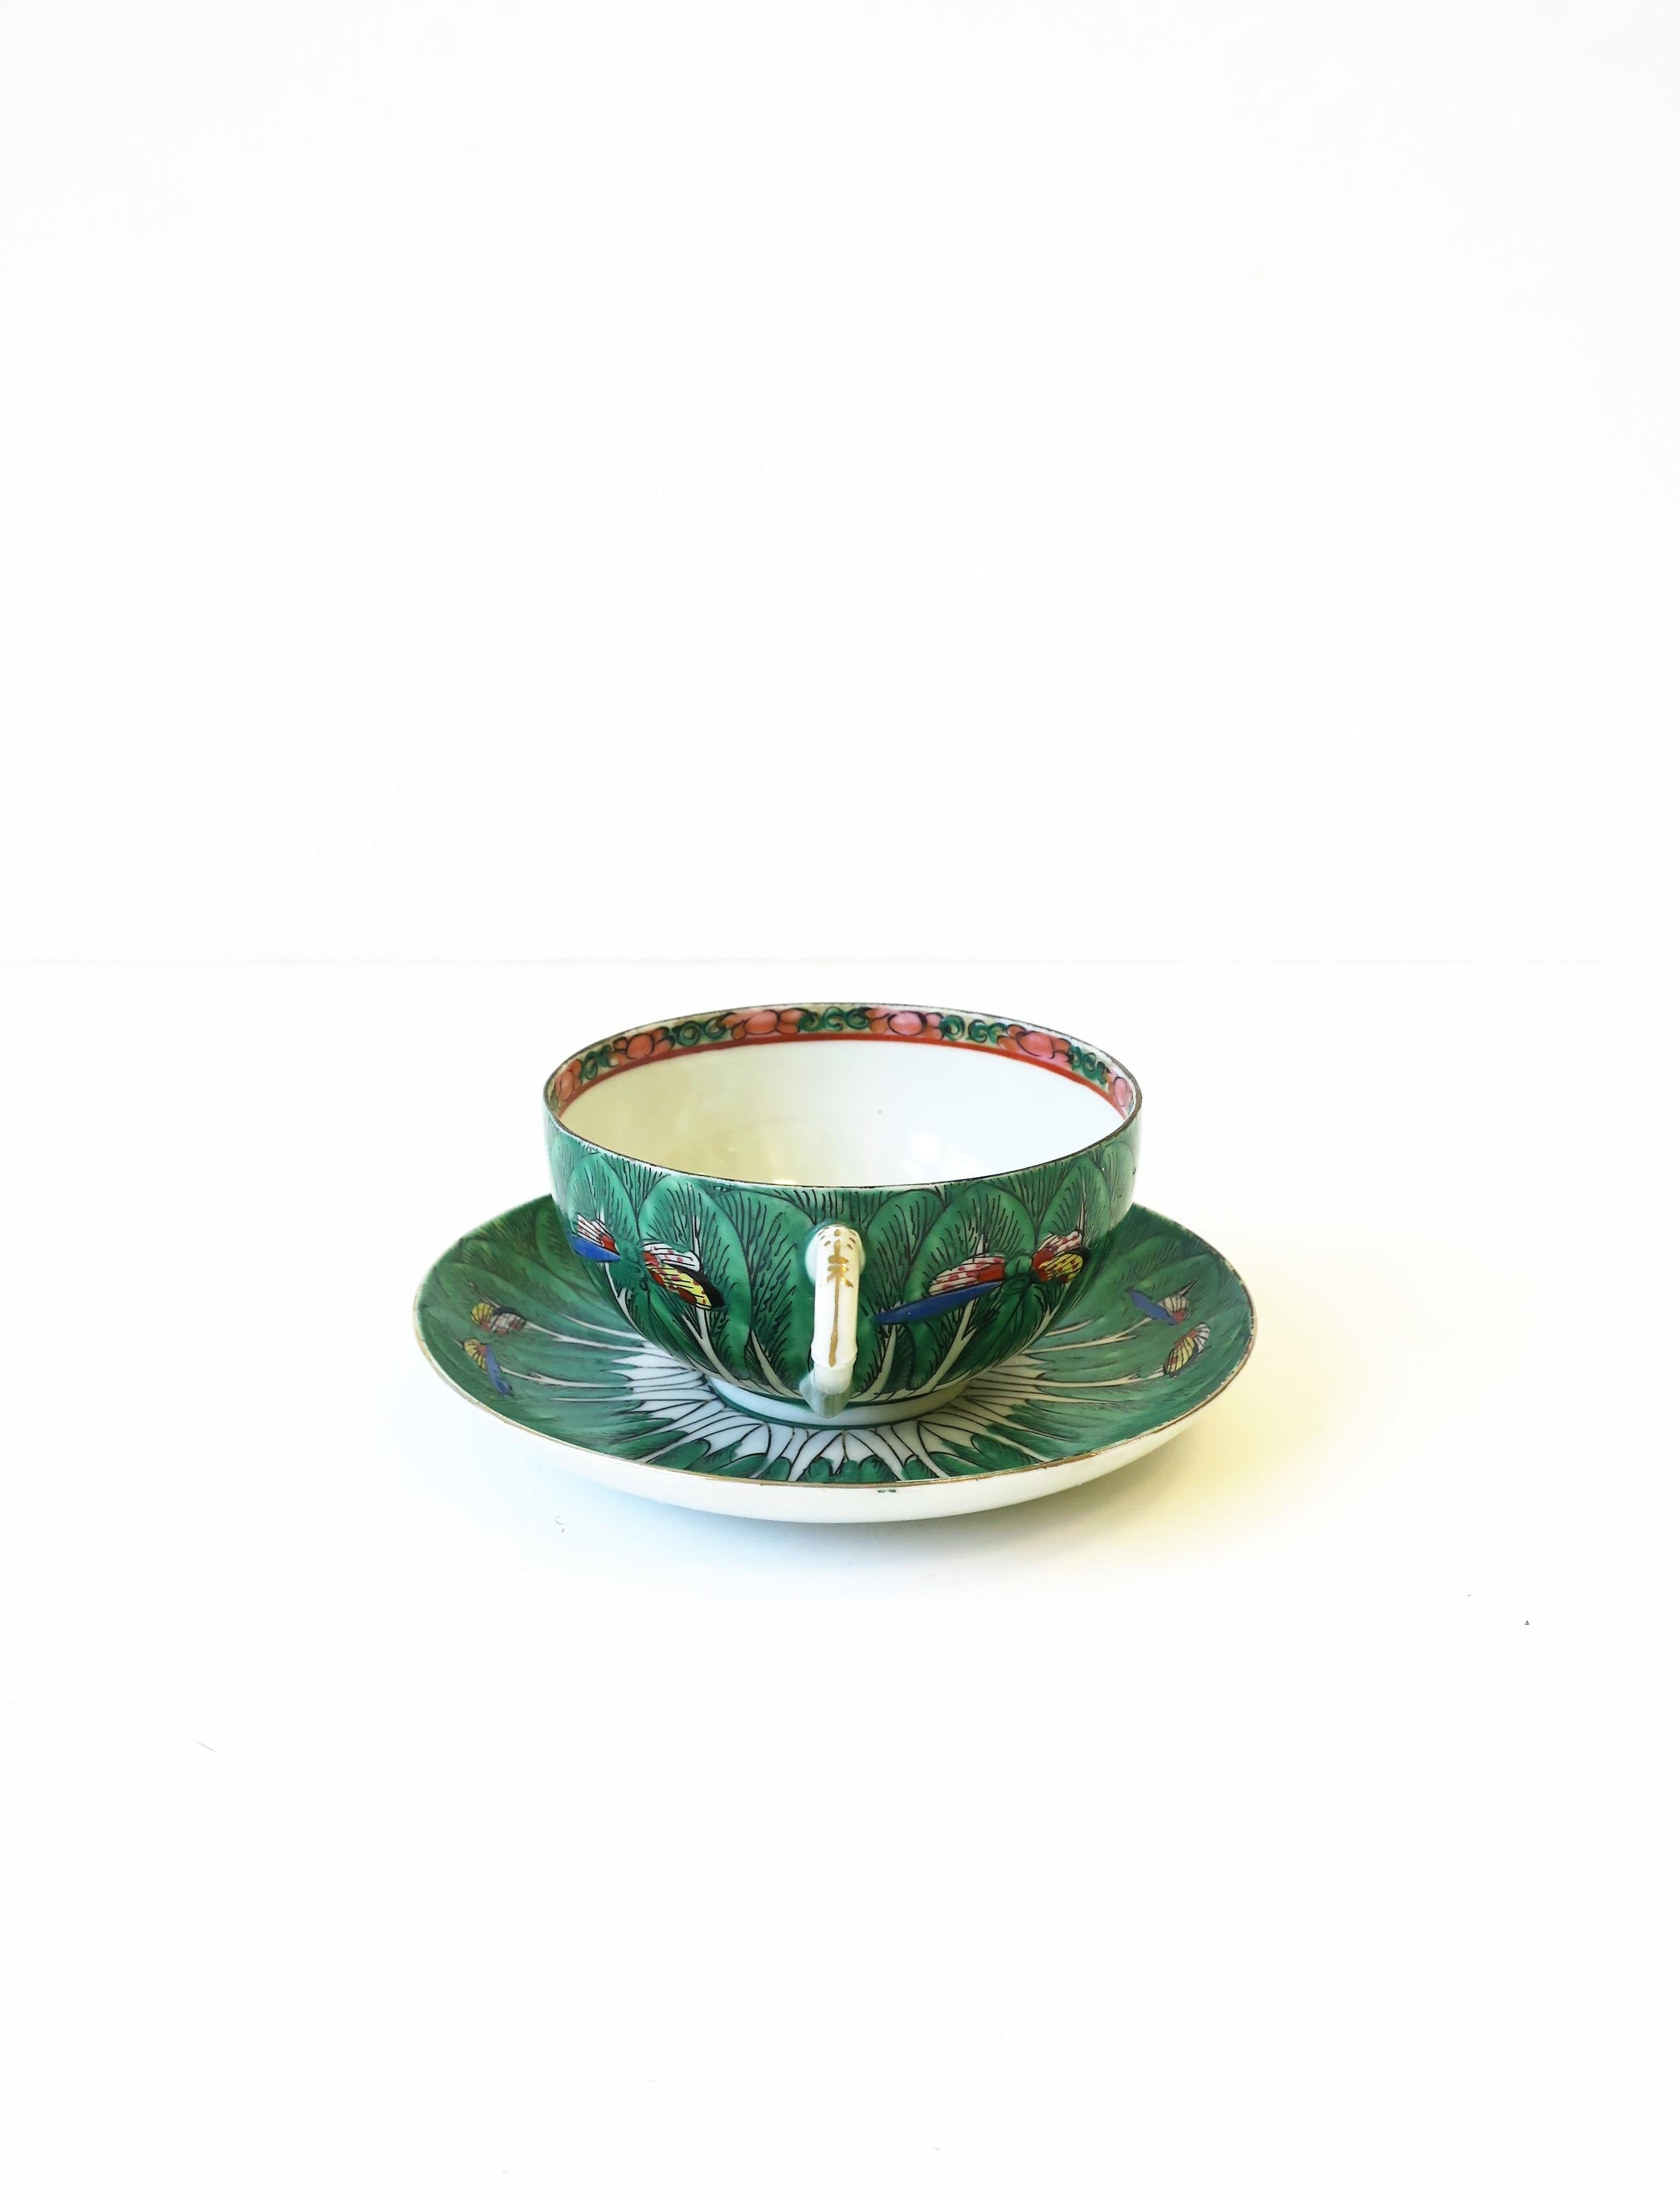 Famille Verte Porcelain Cabbage Leaf & Butterfly Coffee or Tea Cup and Saucer For Sale 3